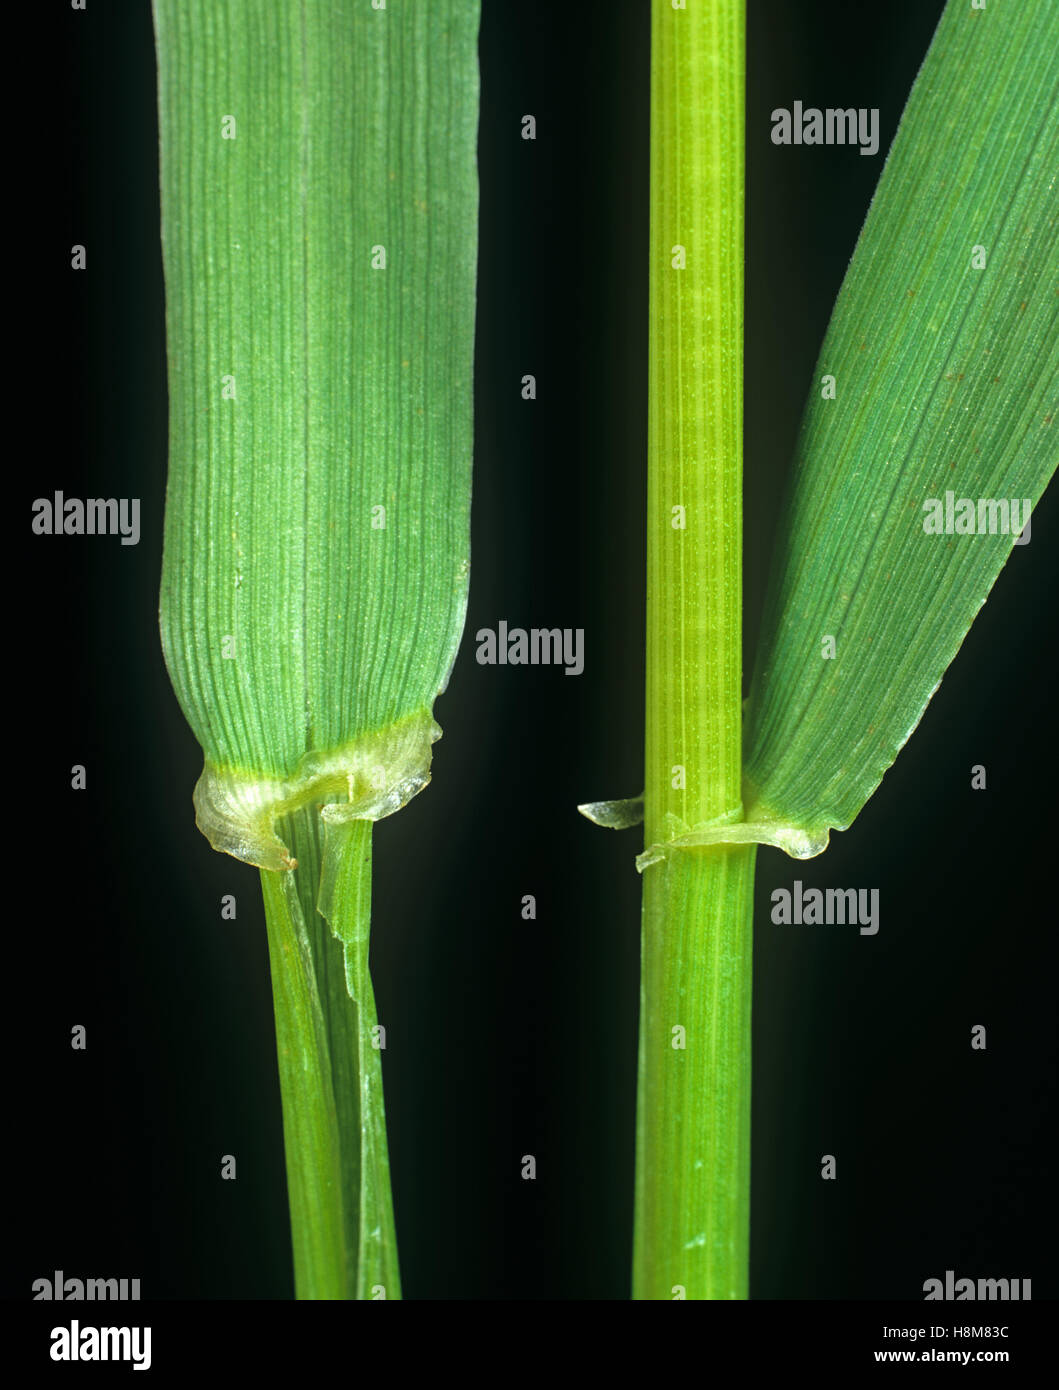 Meadow fescue, Festuca pratensis, leaf ligule at the node and leafstalk of an agricultural grass weed Stock Photo